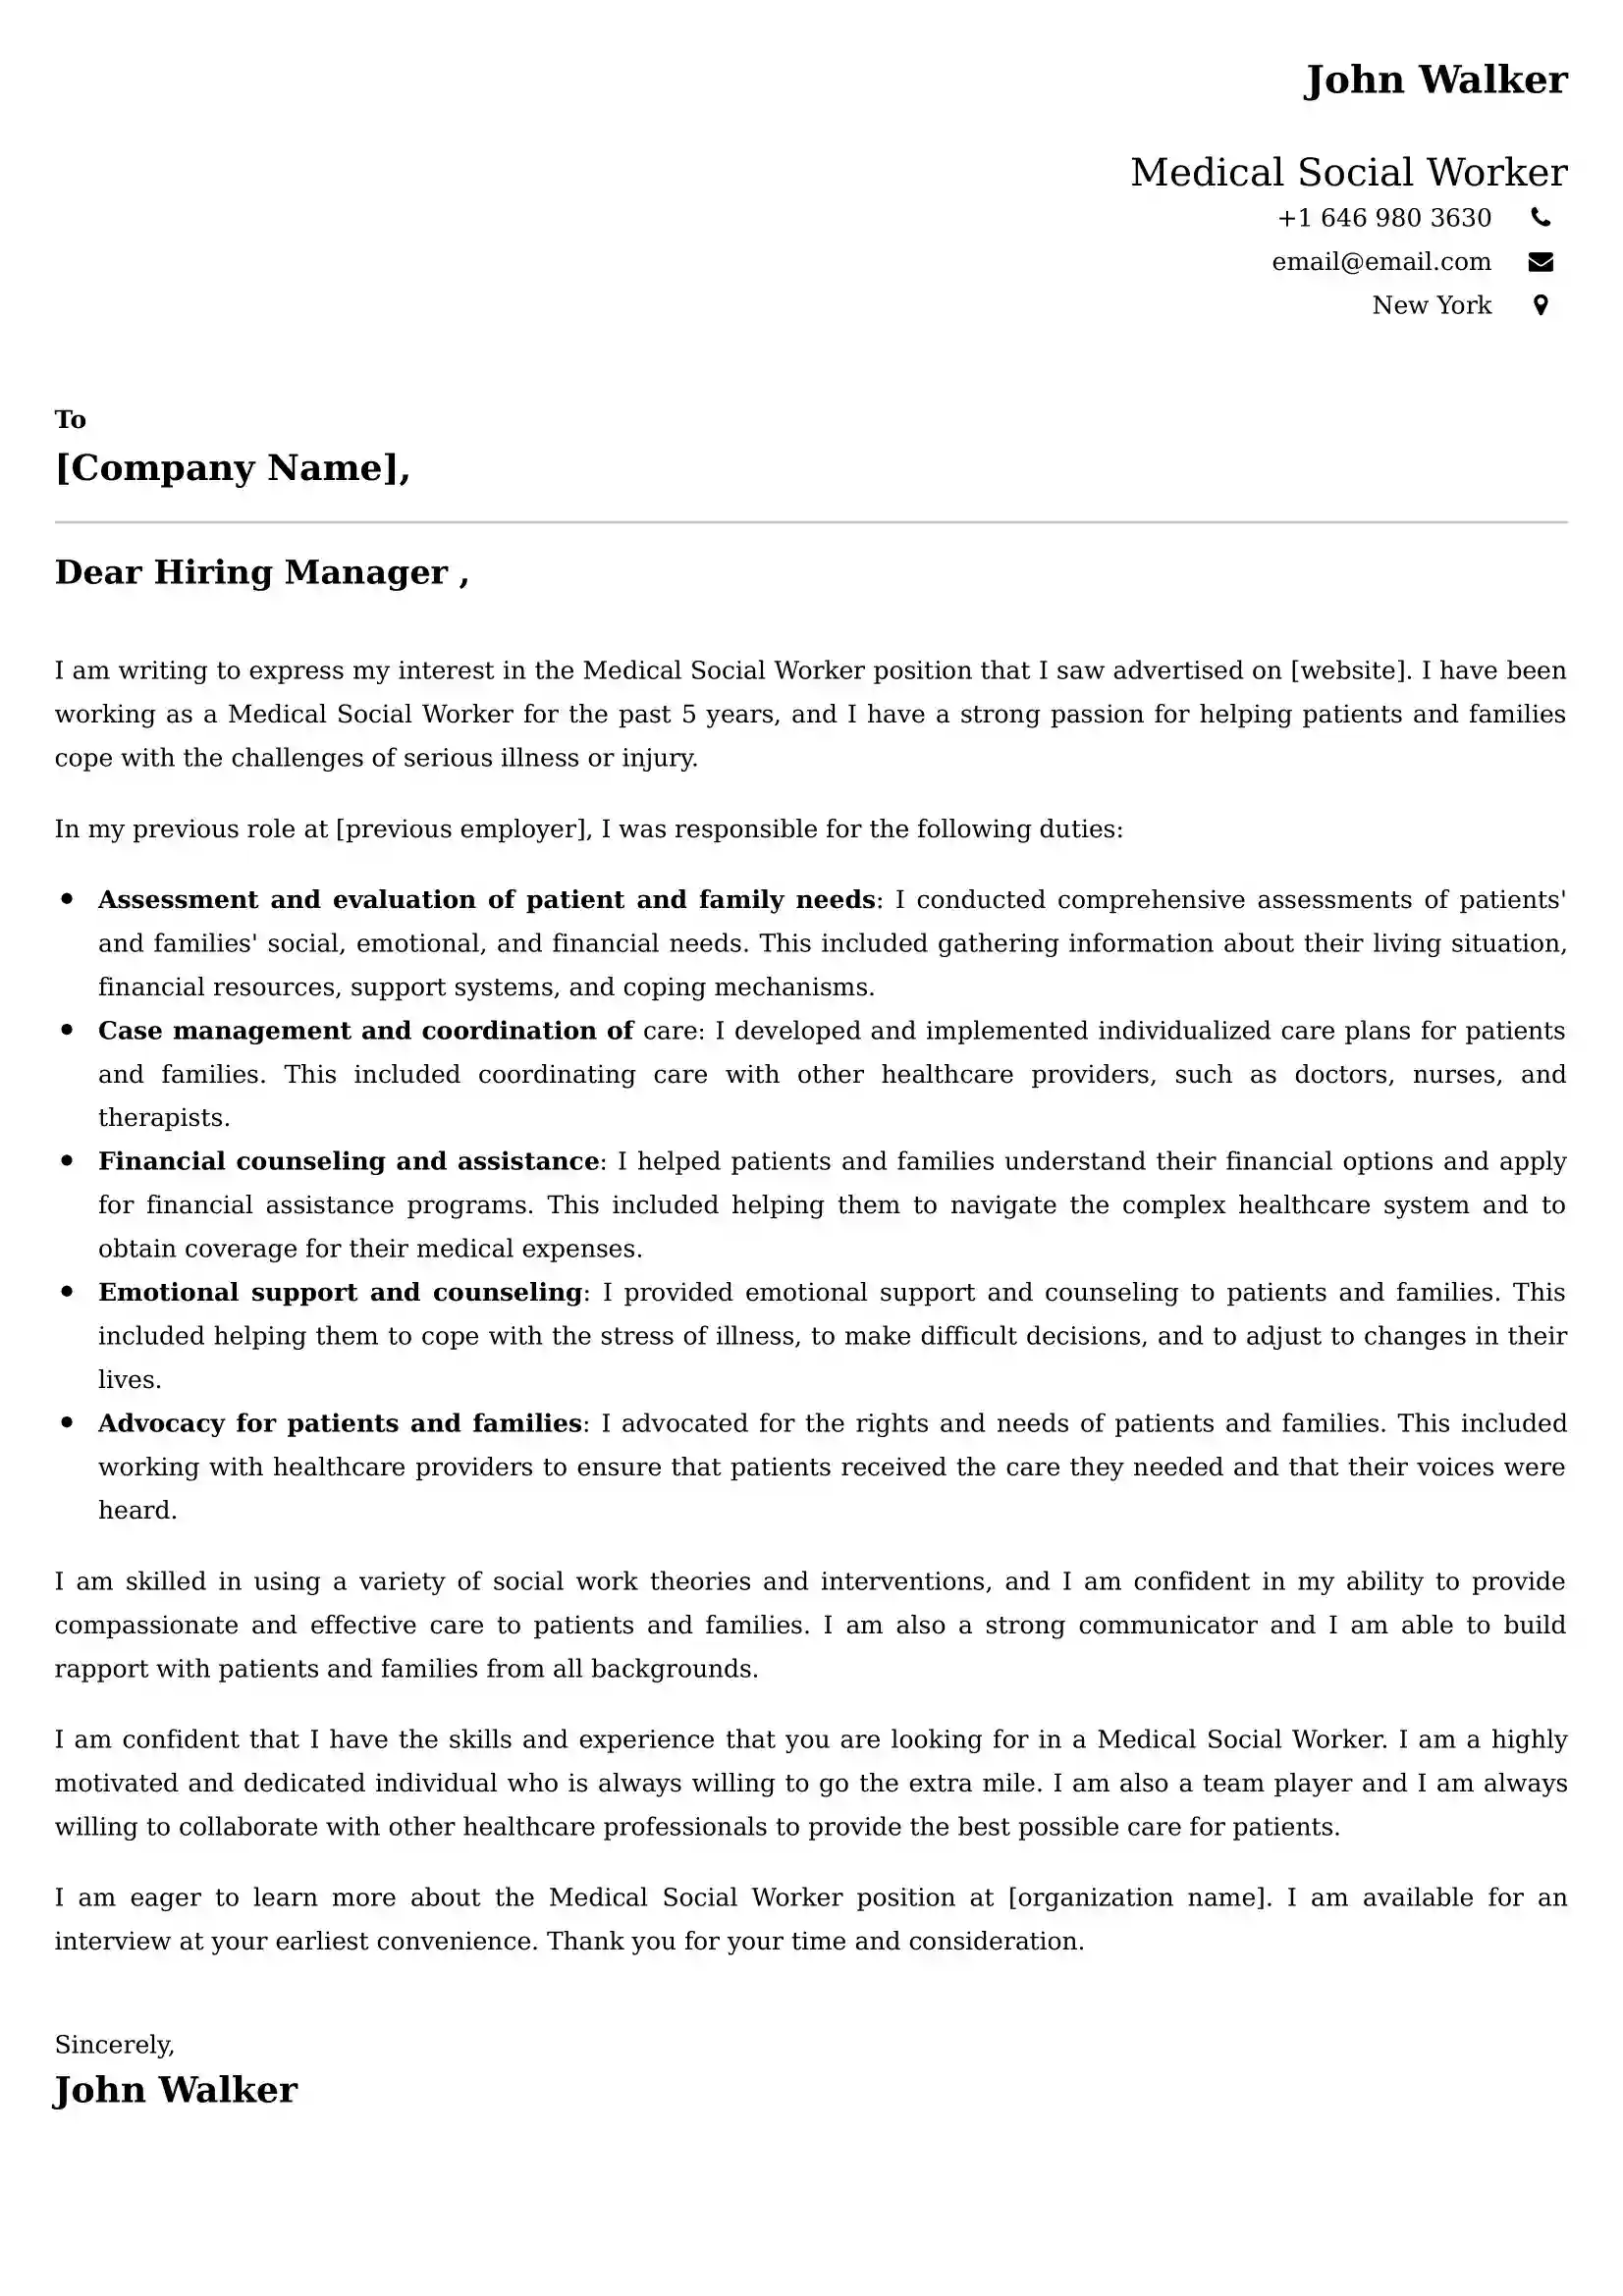 Medical Social Worker Cover Letter Examples for UAE 